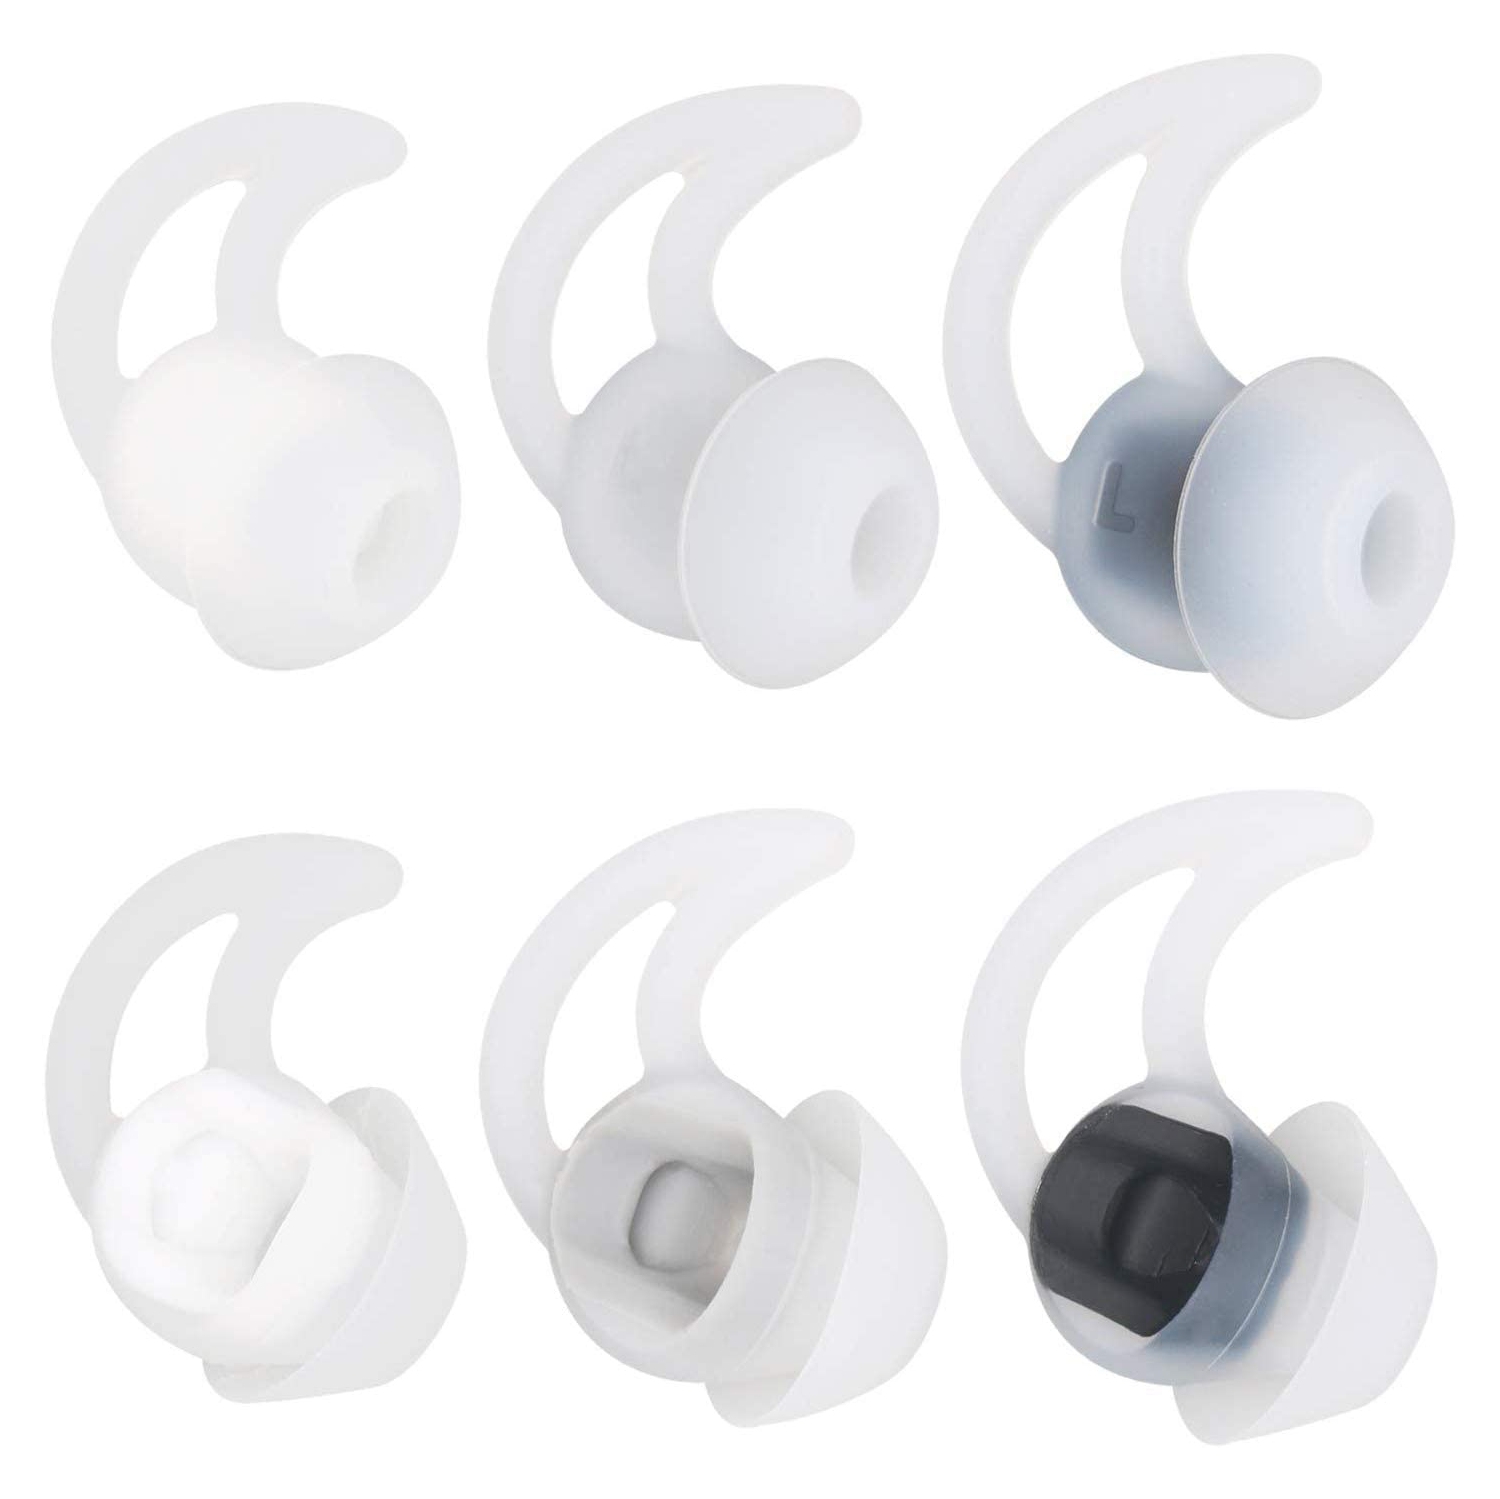 Ear Tips for Bose SoundSport Free Headphone, S/M/L 3 Pair Replacement Soft Silicone Earbud Tips, Fit for Bose